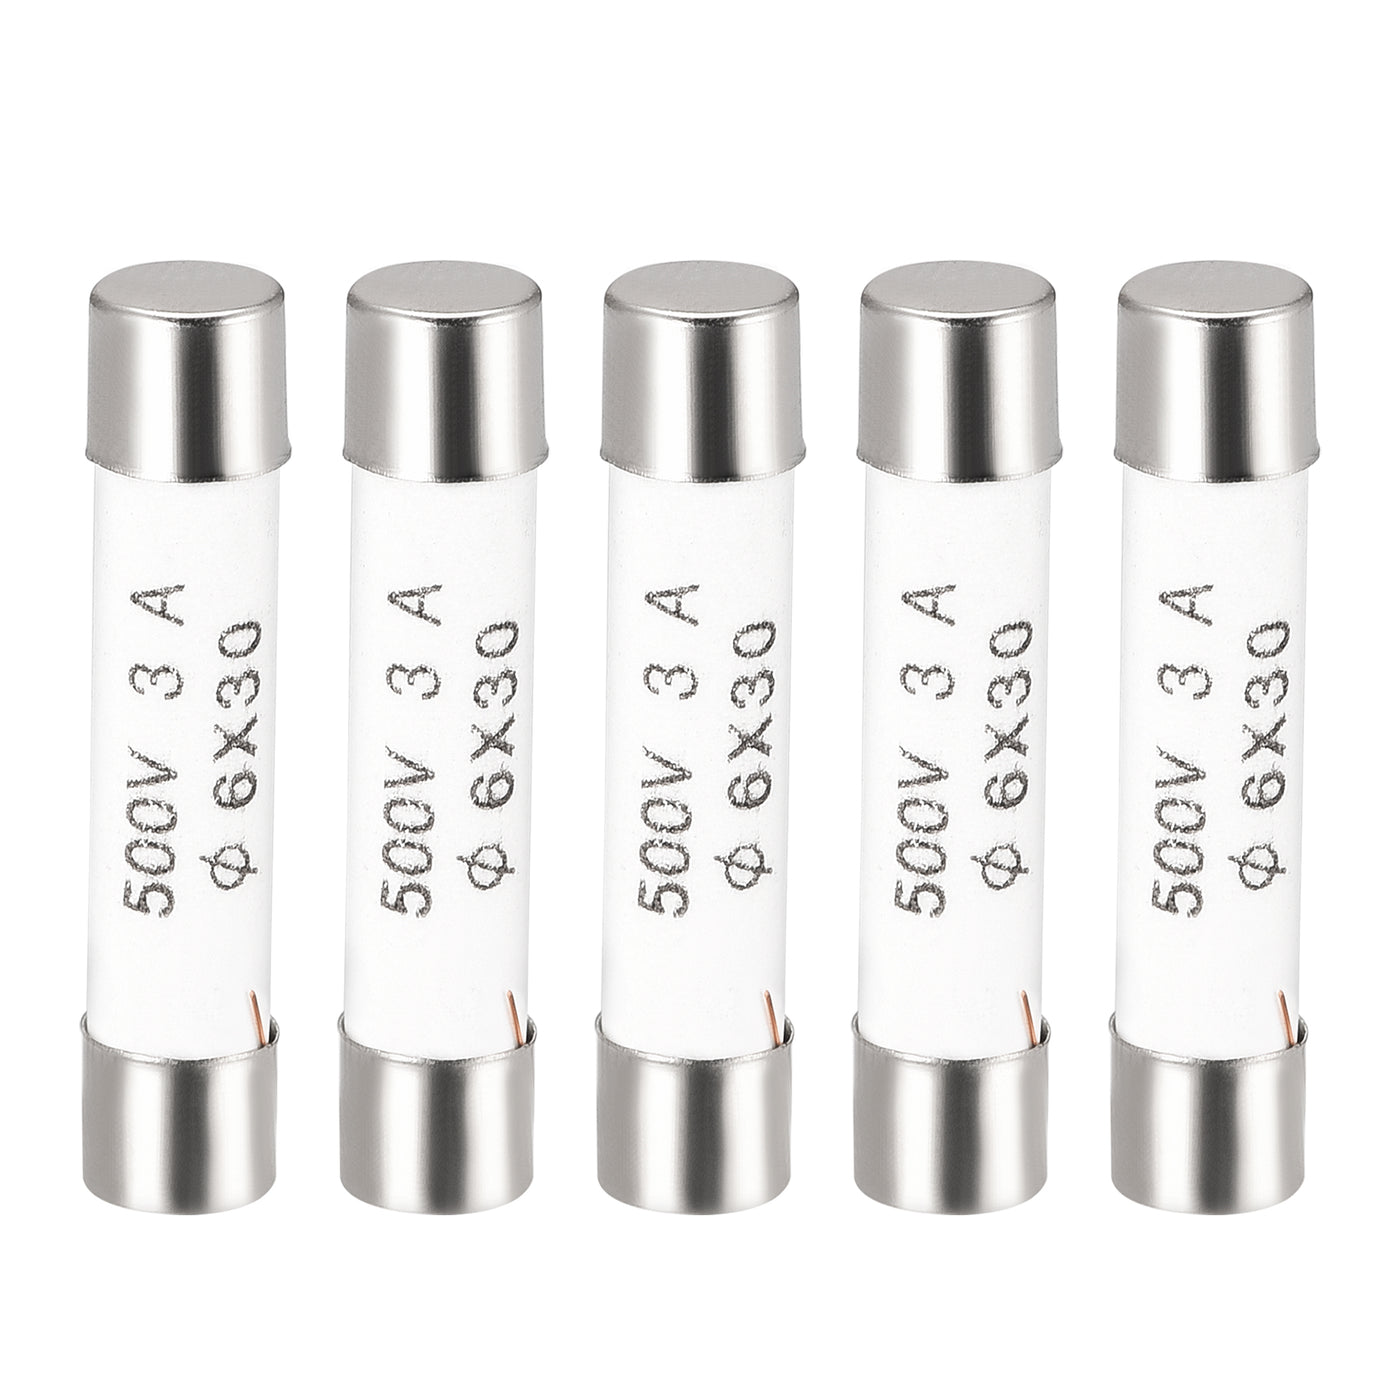 uxcell Uxcell Ceramic Cartridge Fuses 3A 500V 6x30mm Fast Blow for Energy Saving Lamp 5pcs